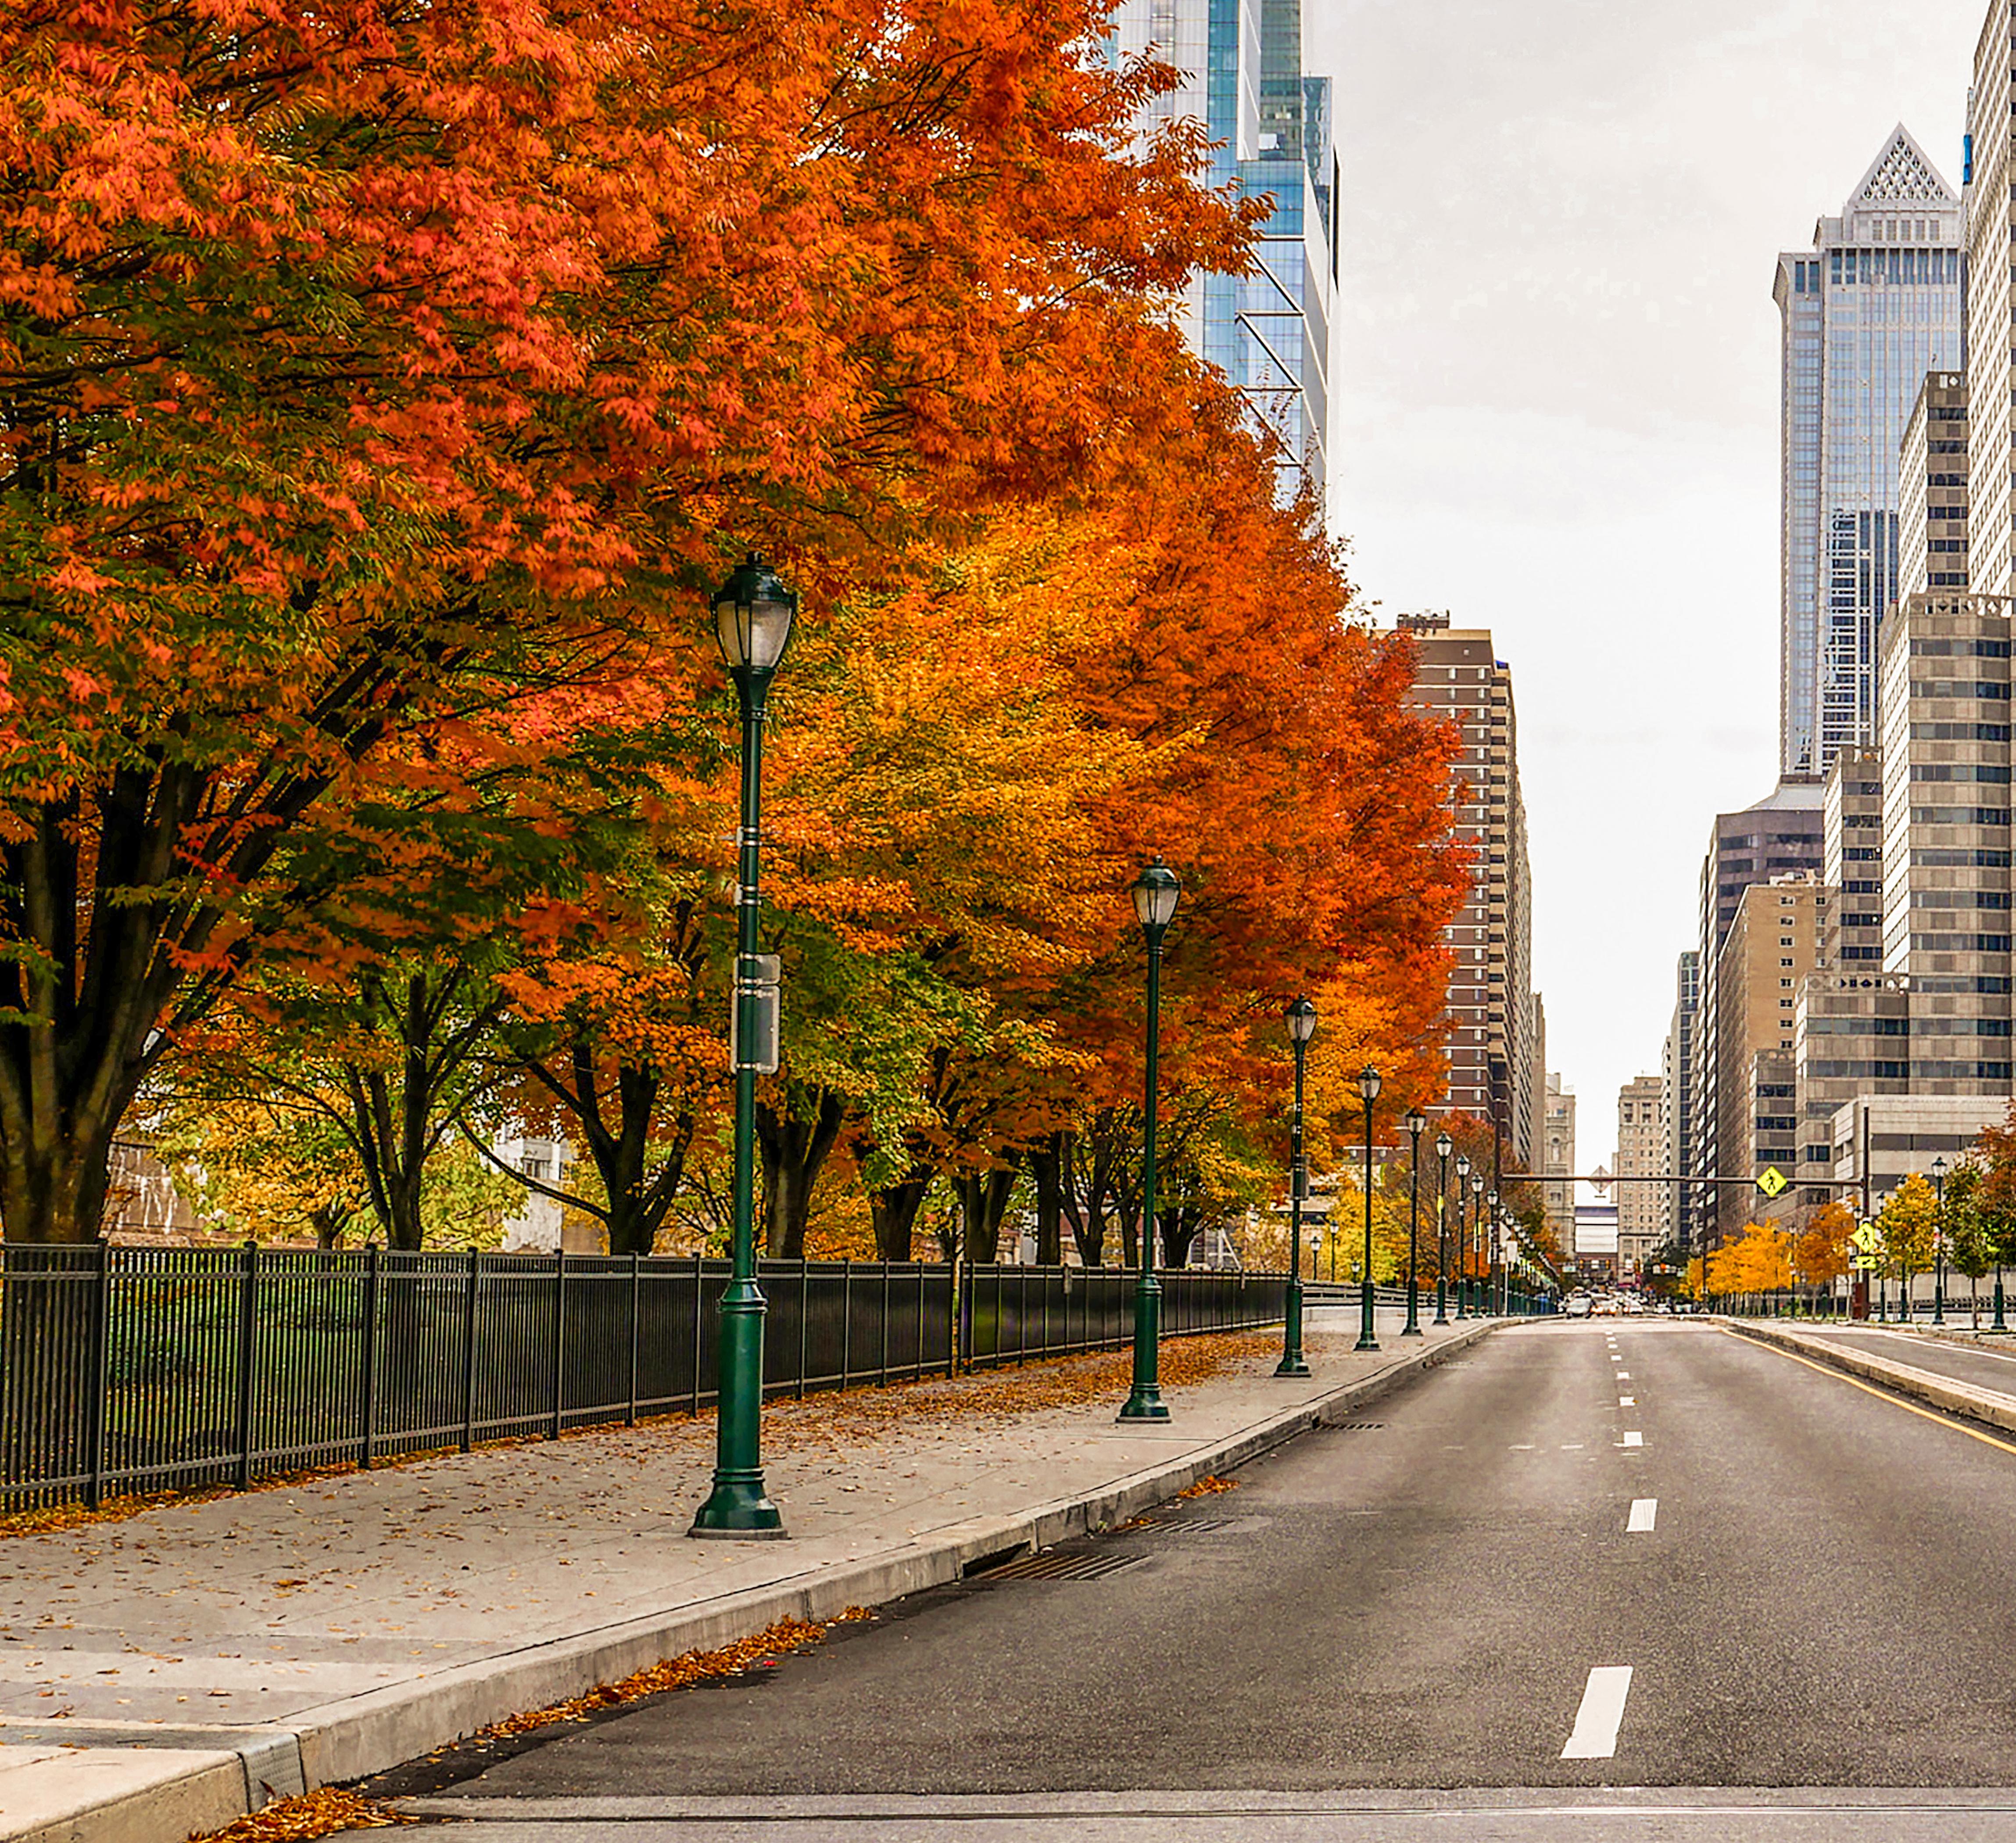 Road with City view with autumn colored trees.